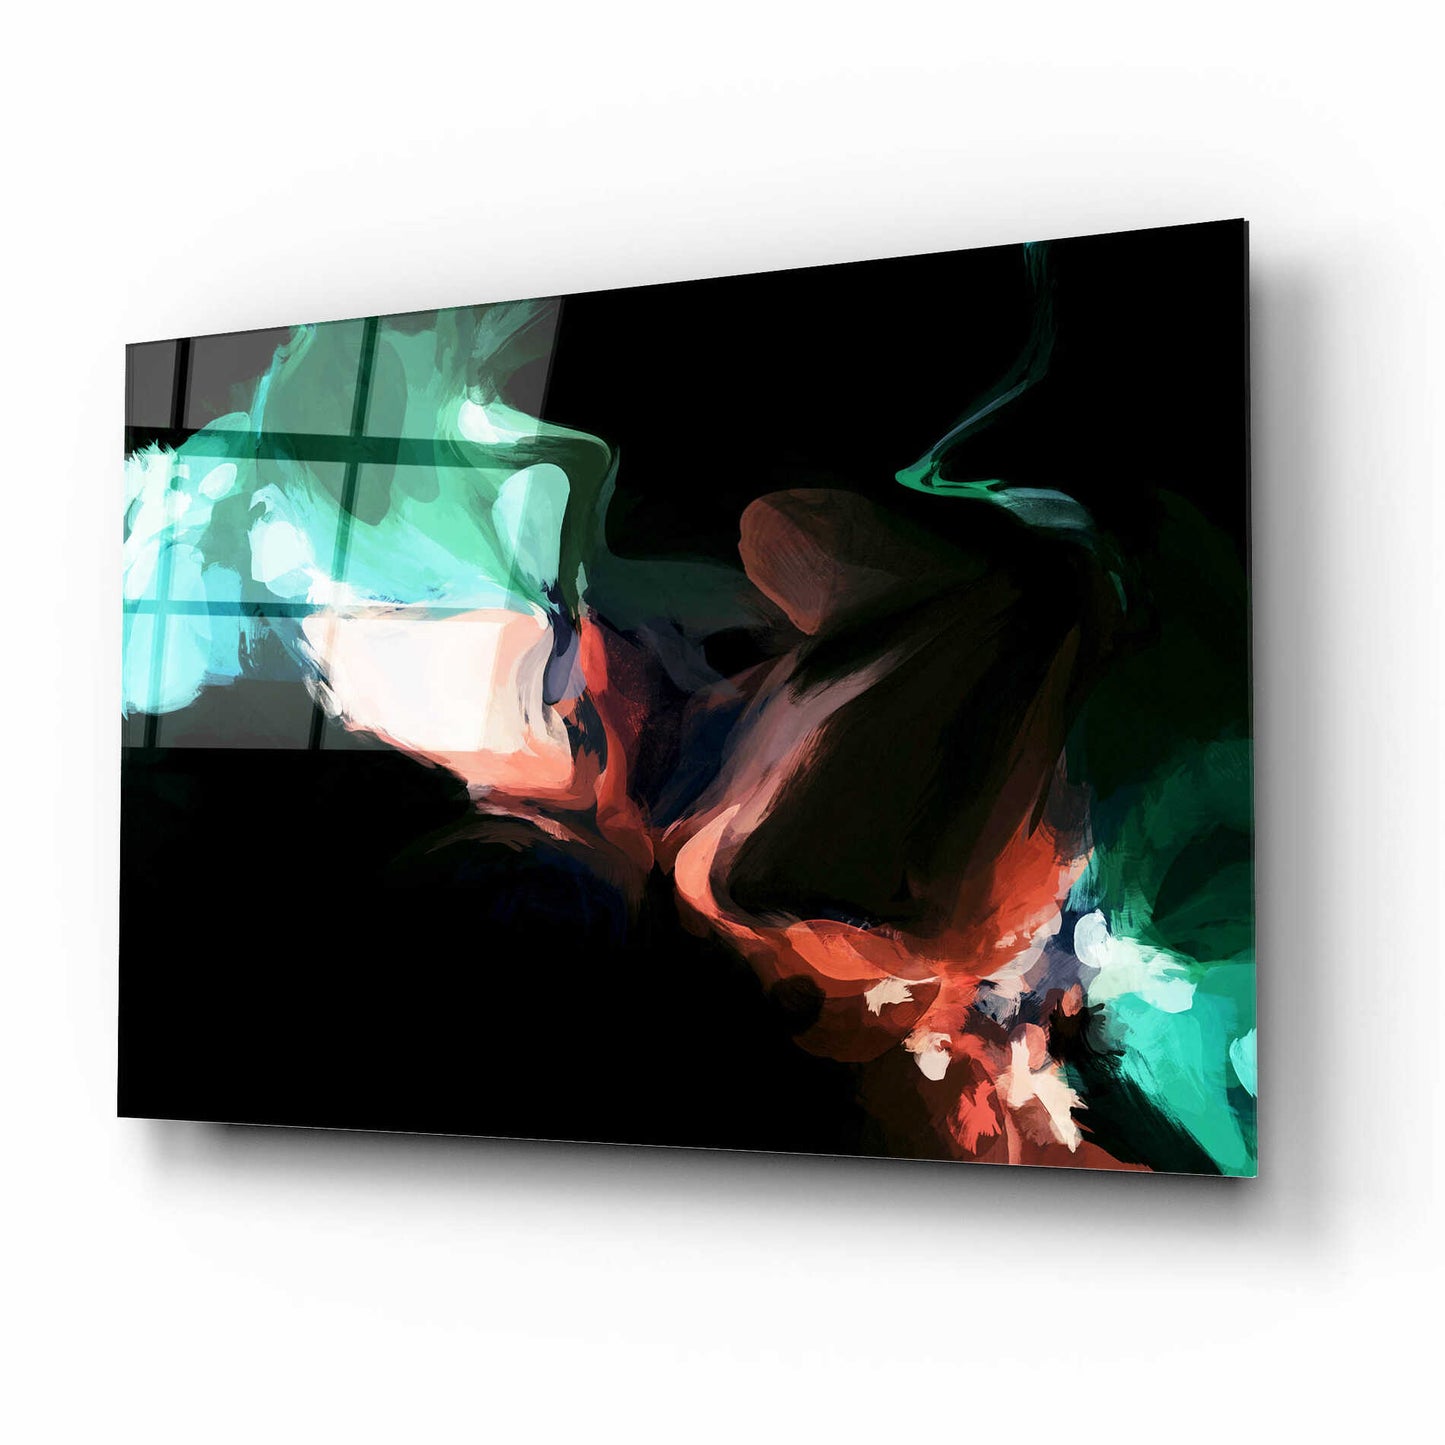 Epic Art 'Inverted Abstract Colorful Flows 18' by Irena Orlov Acrylic Glass Wall Art,16x12